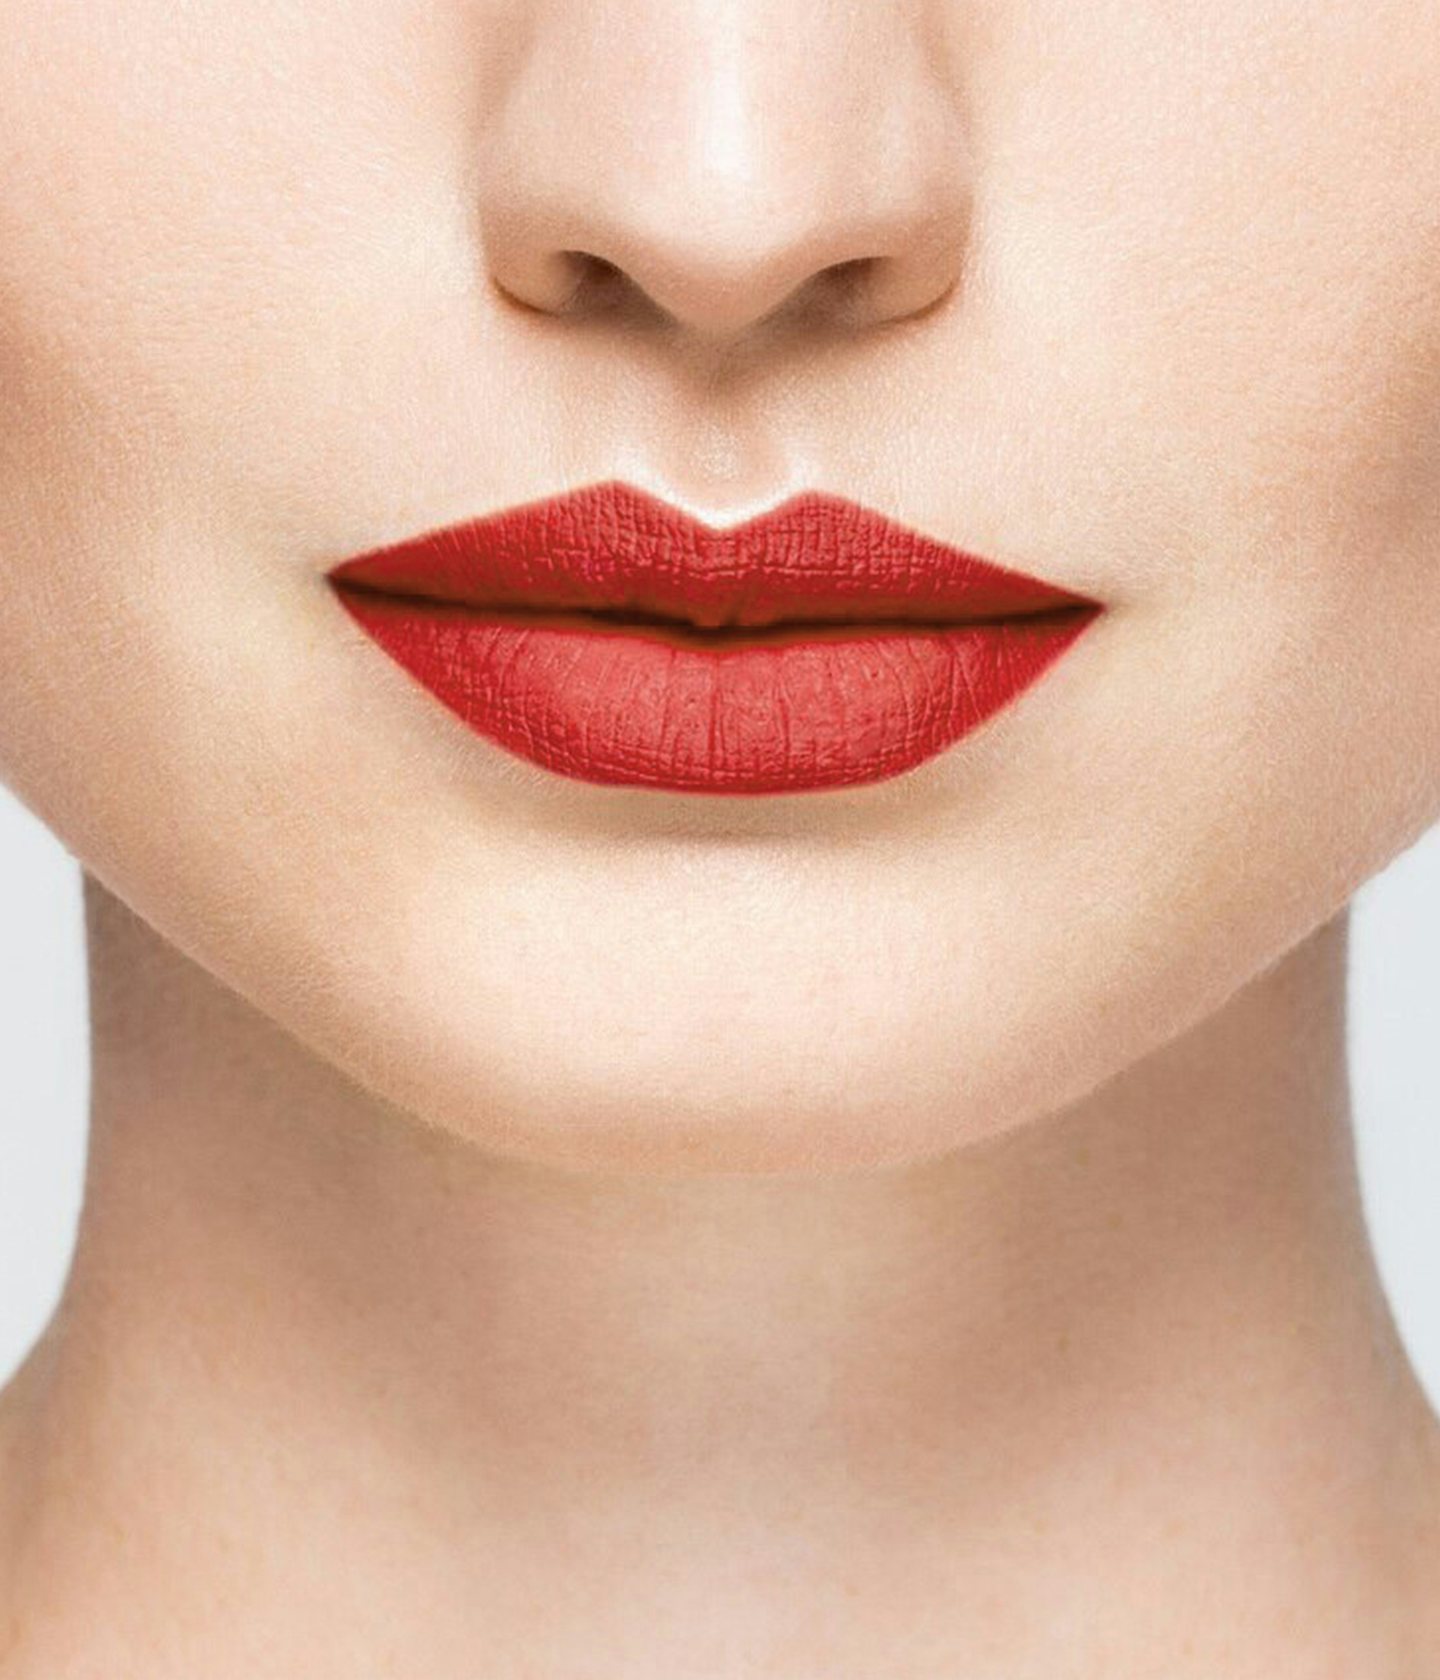 La bouche rouge The Red Andreea lipstick shade on the lips of a fair skin model